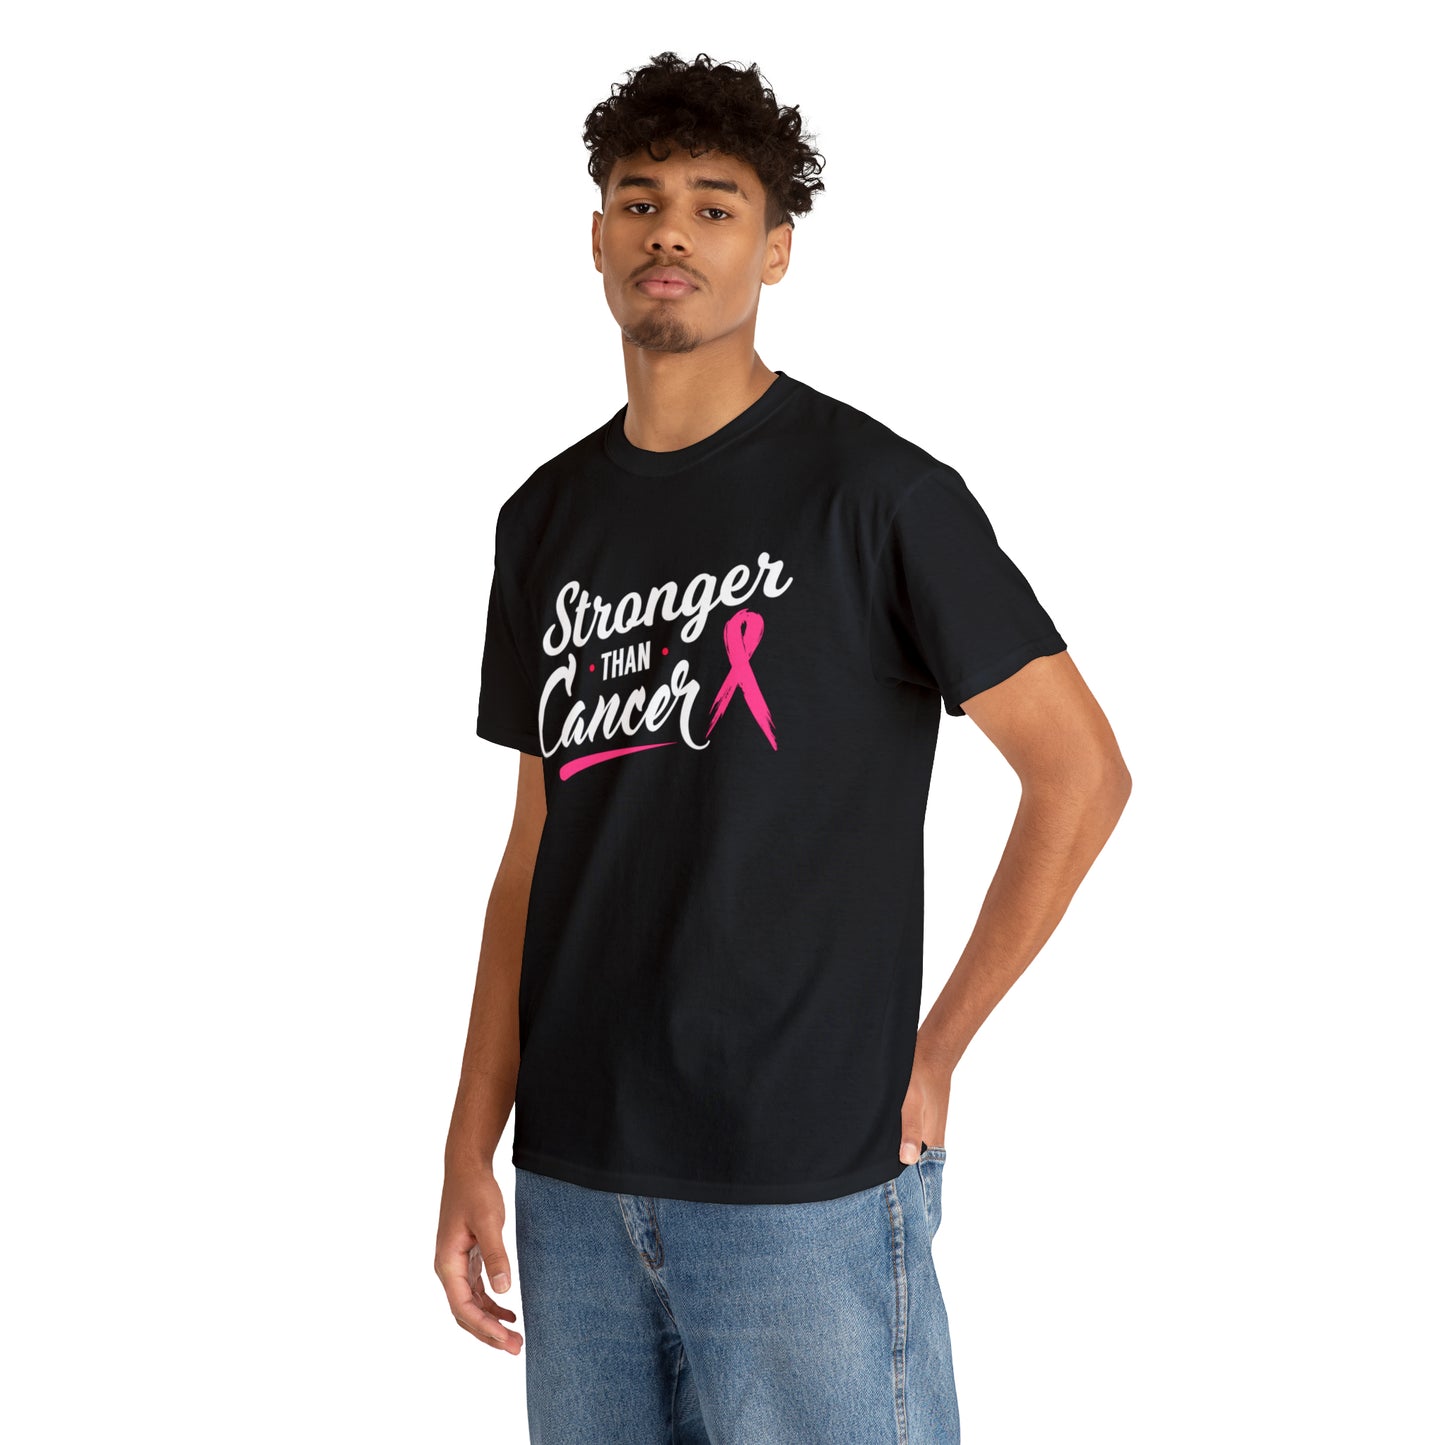 Stronger than Cancer Pink Ribbon Awareness Unisex Heavy Cotton Tee